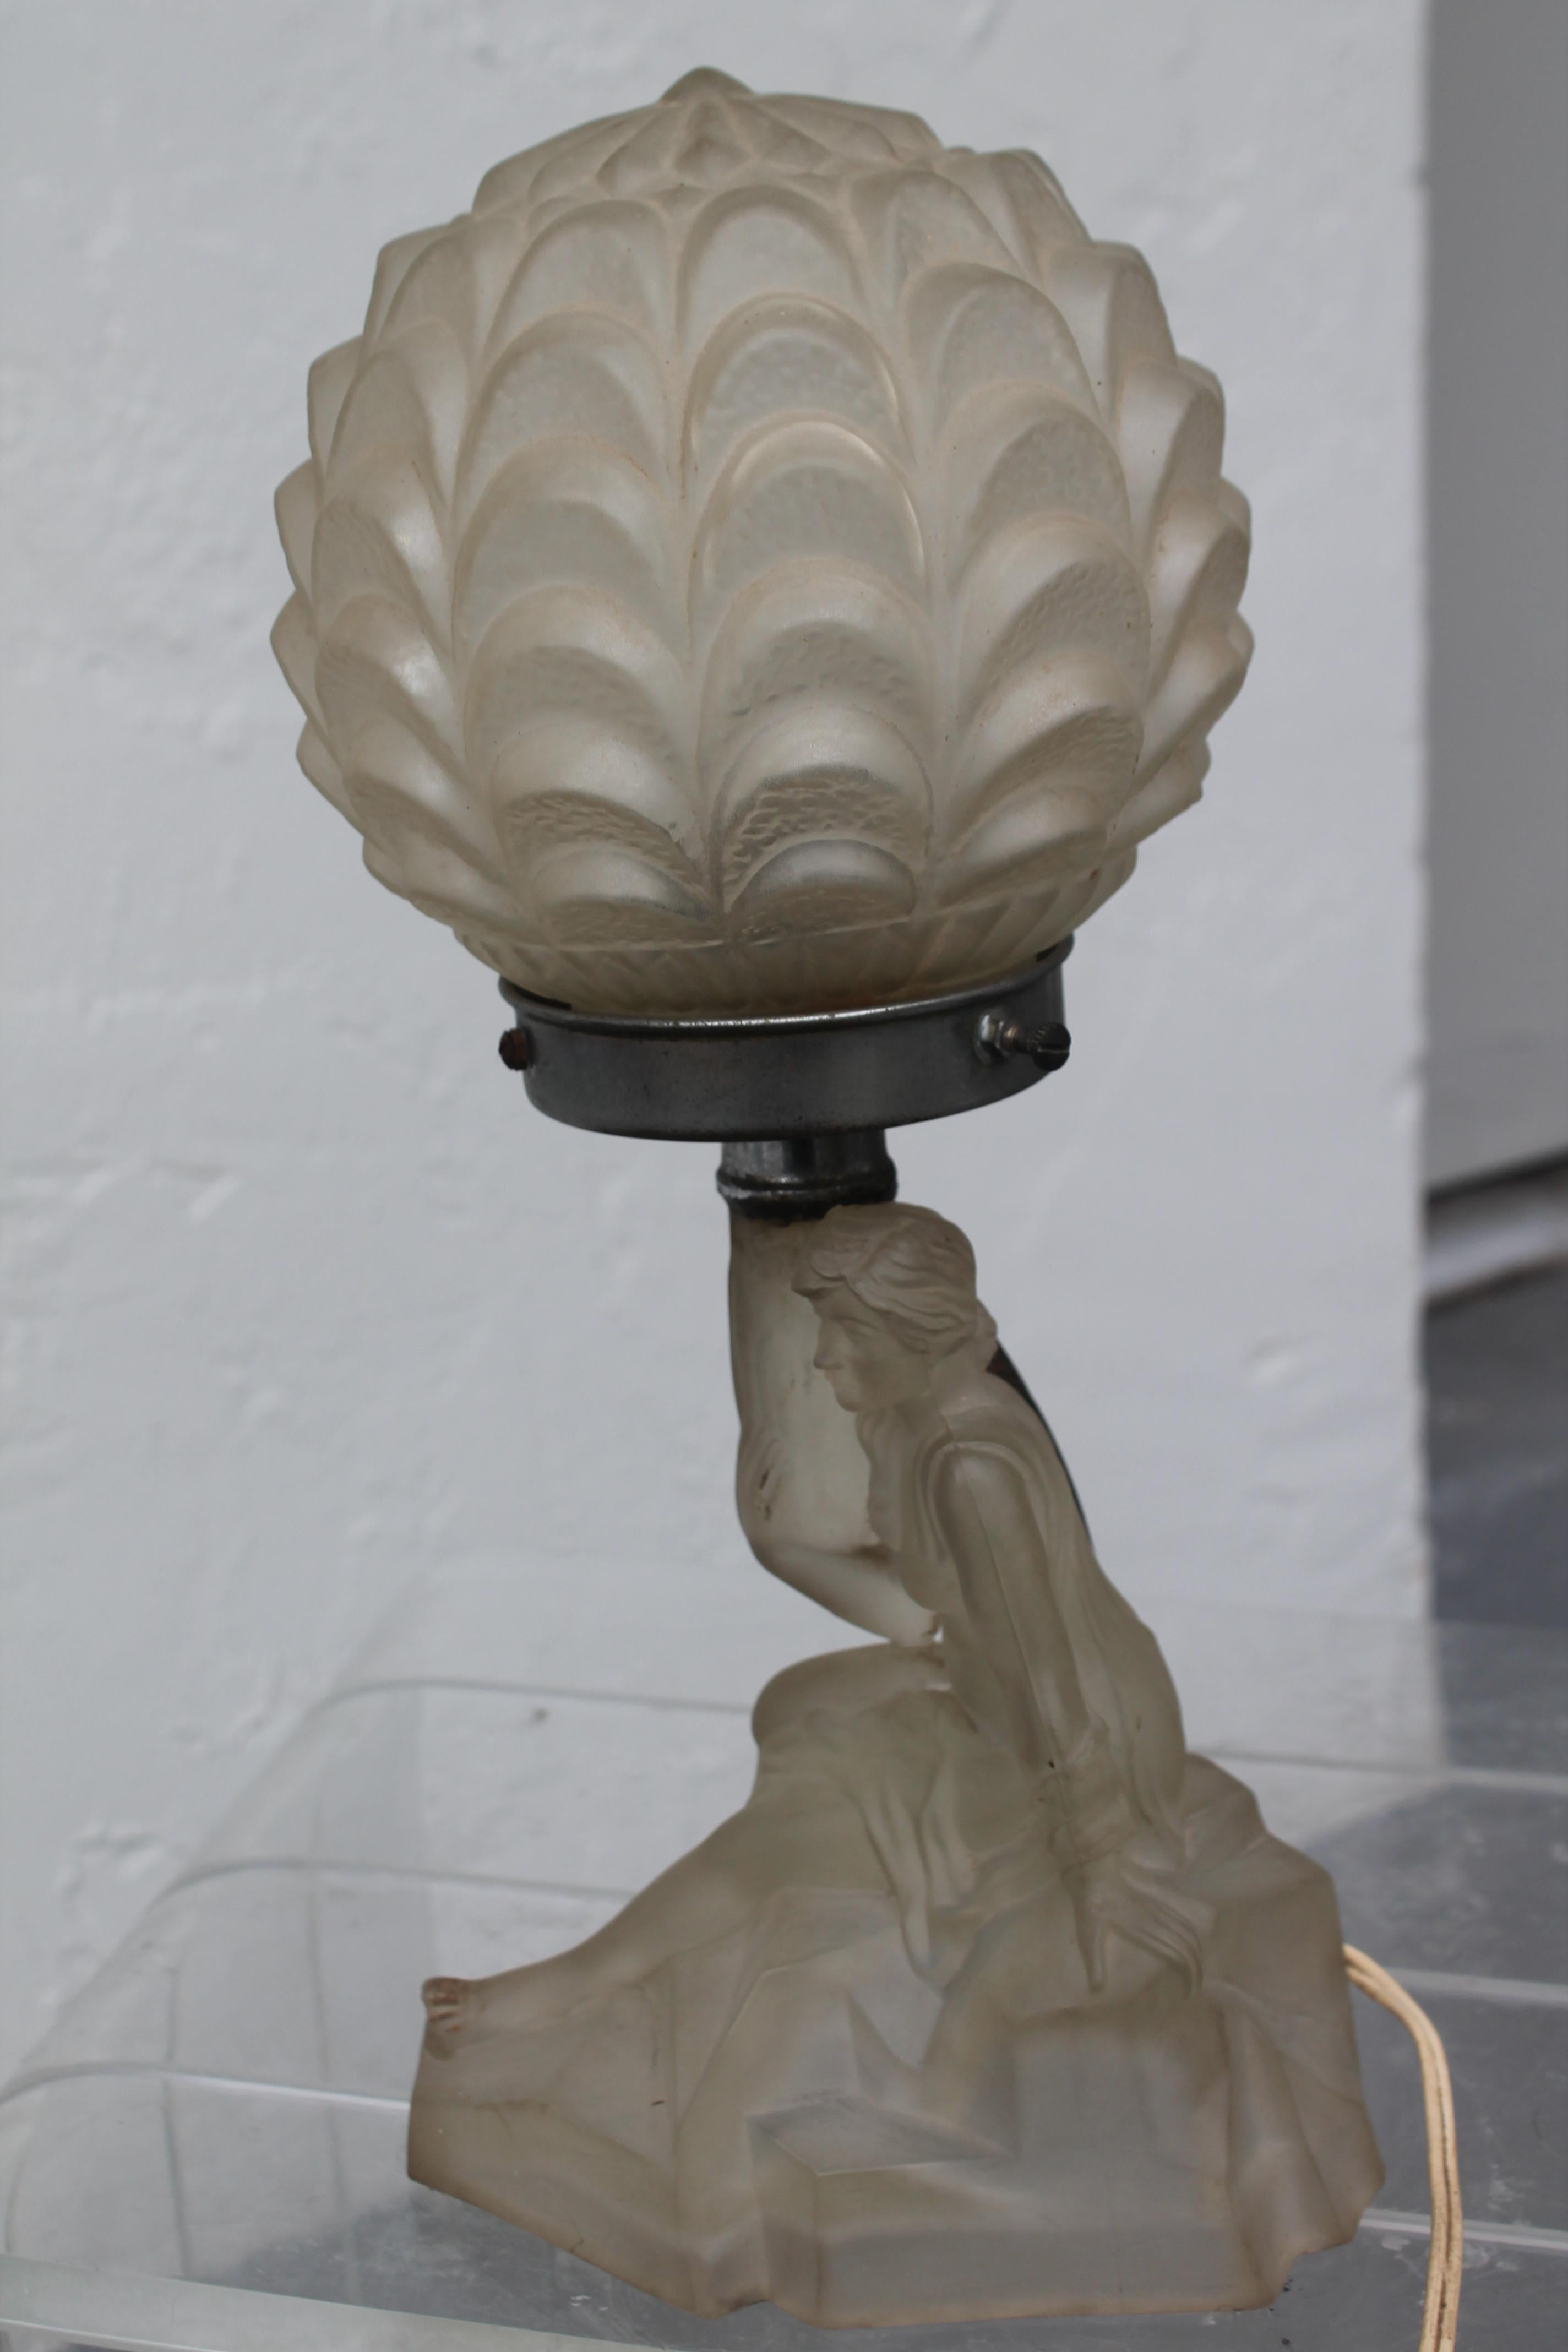 1930's French Art Deco Art Glass Figural Table Lamp - Designer In Good Condition For Sale In Opa Locka, FL